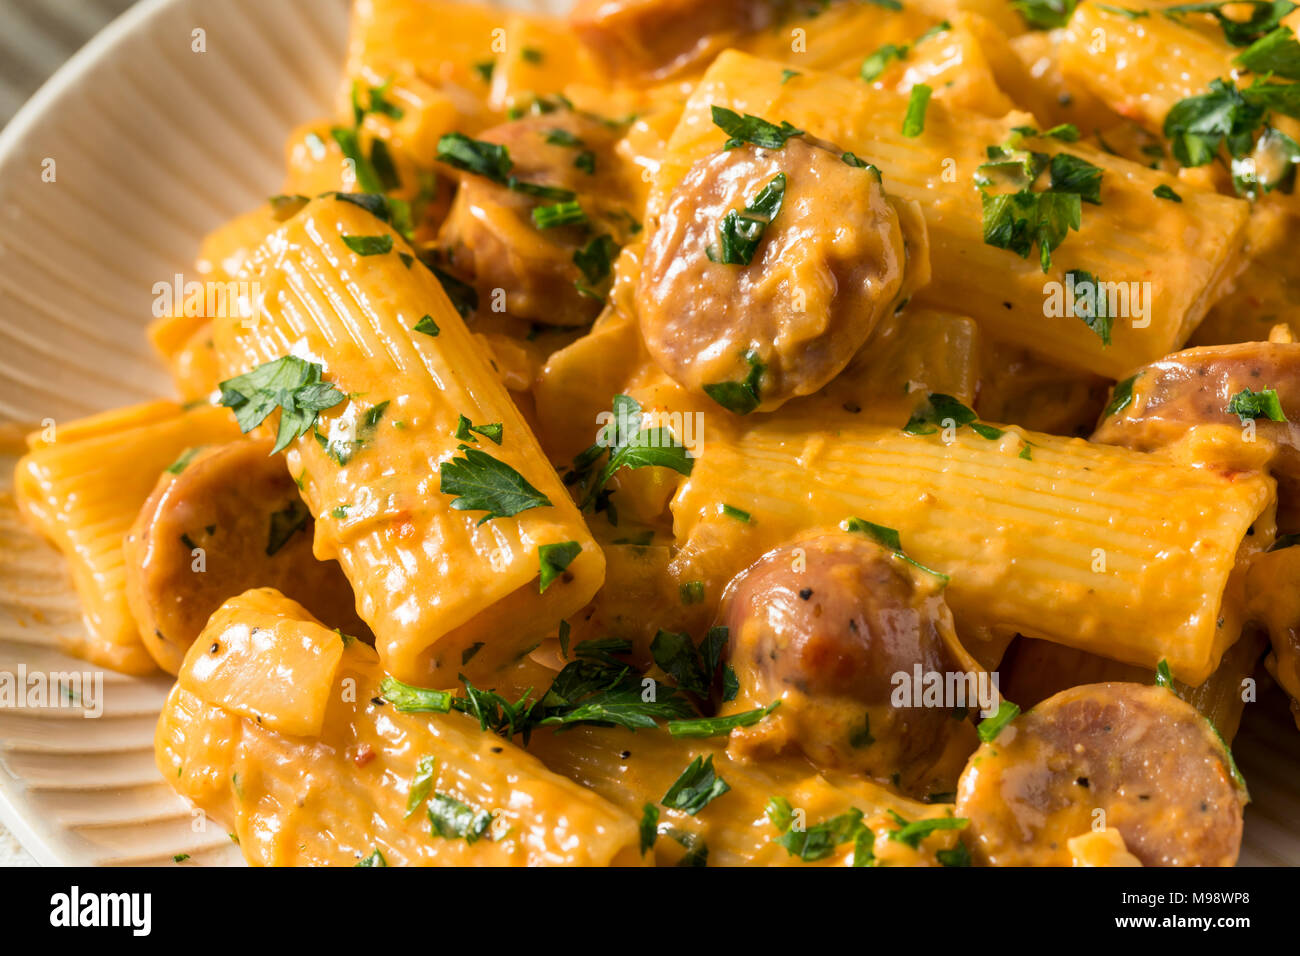 Homemade Sausage and Fennel Rigatoni with Cream Sauce Stock Photo